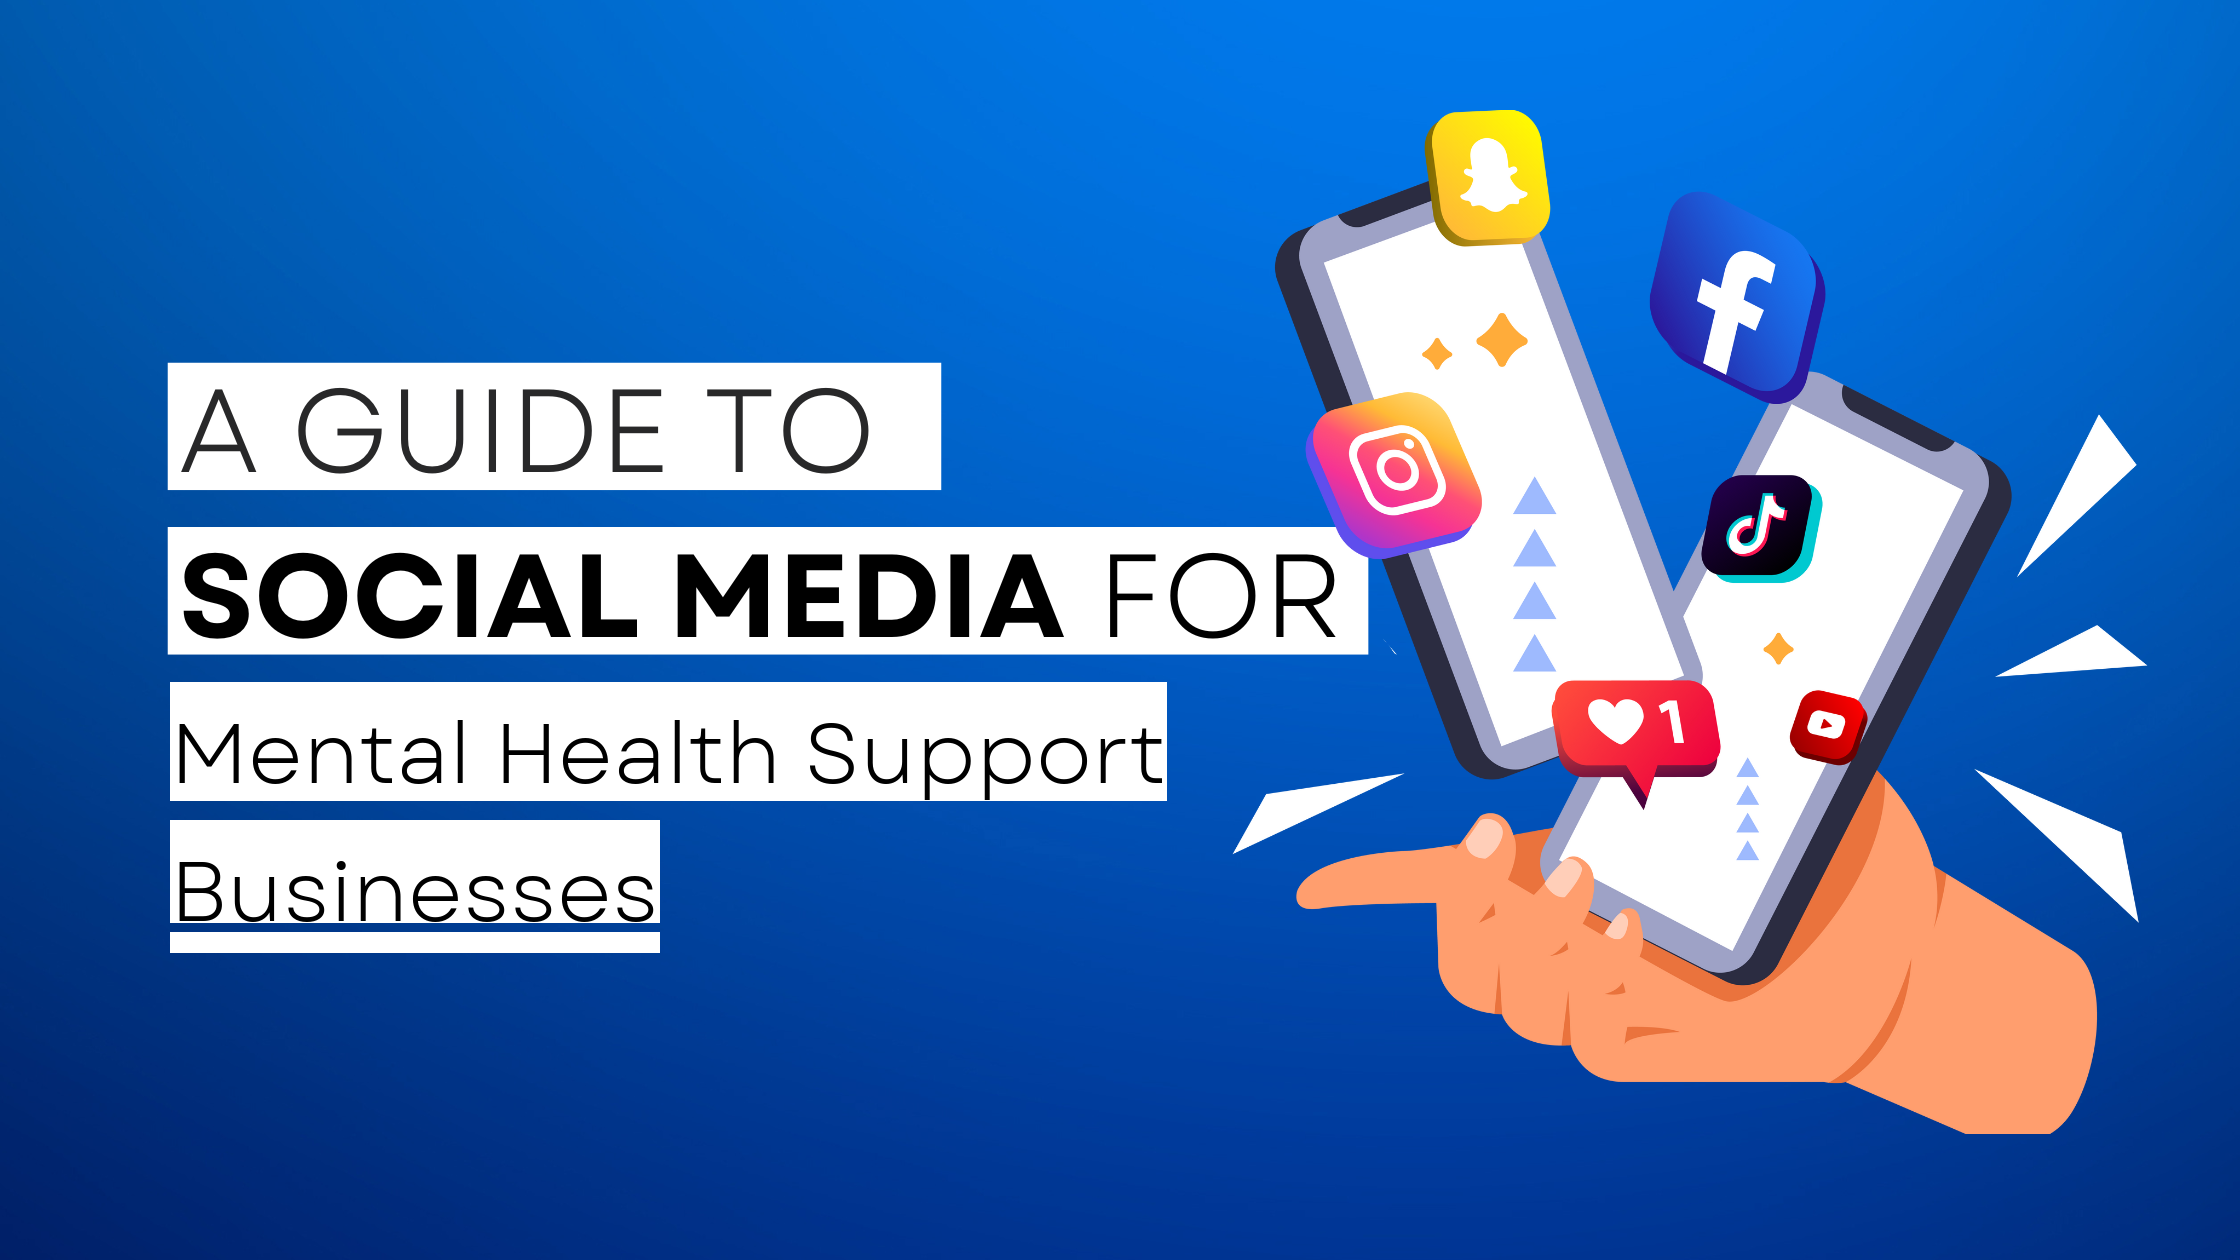 How to start Mental Health Support on social media